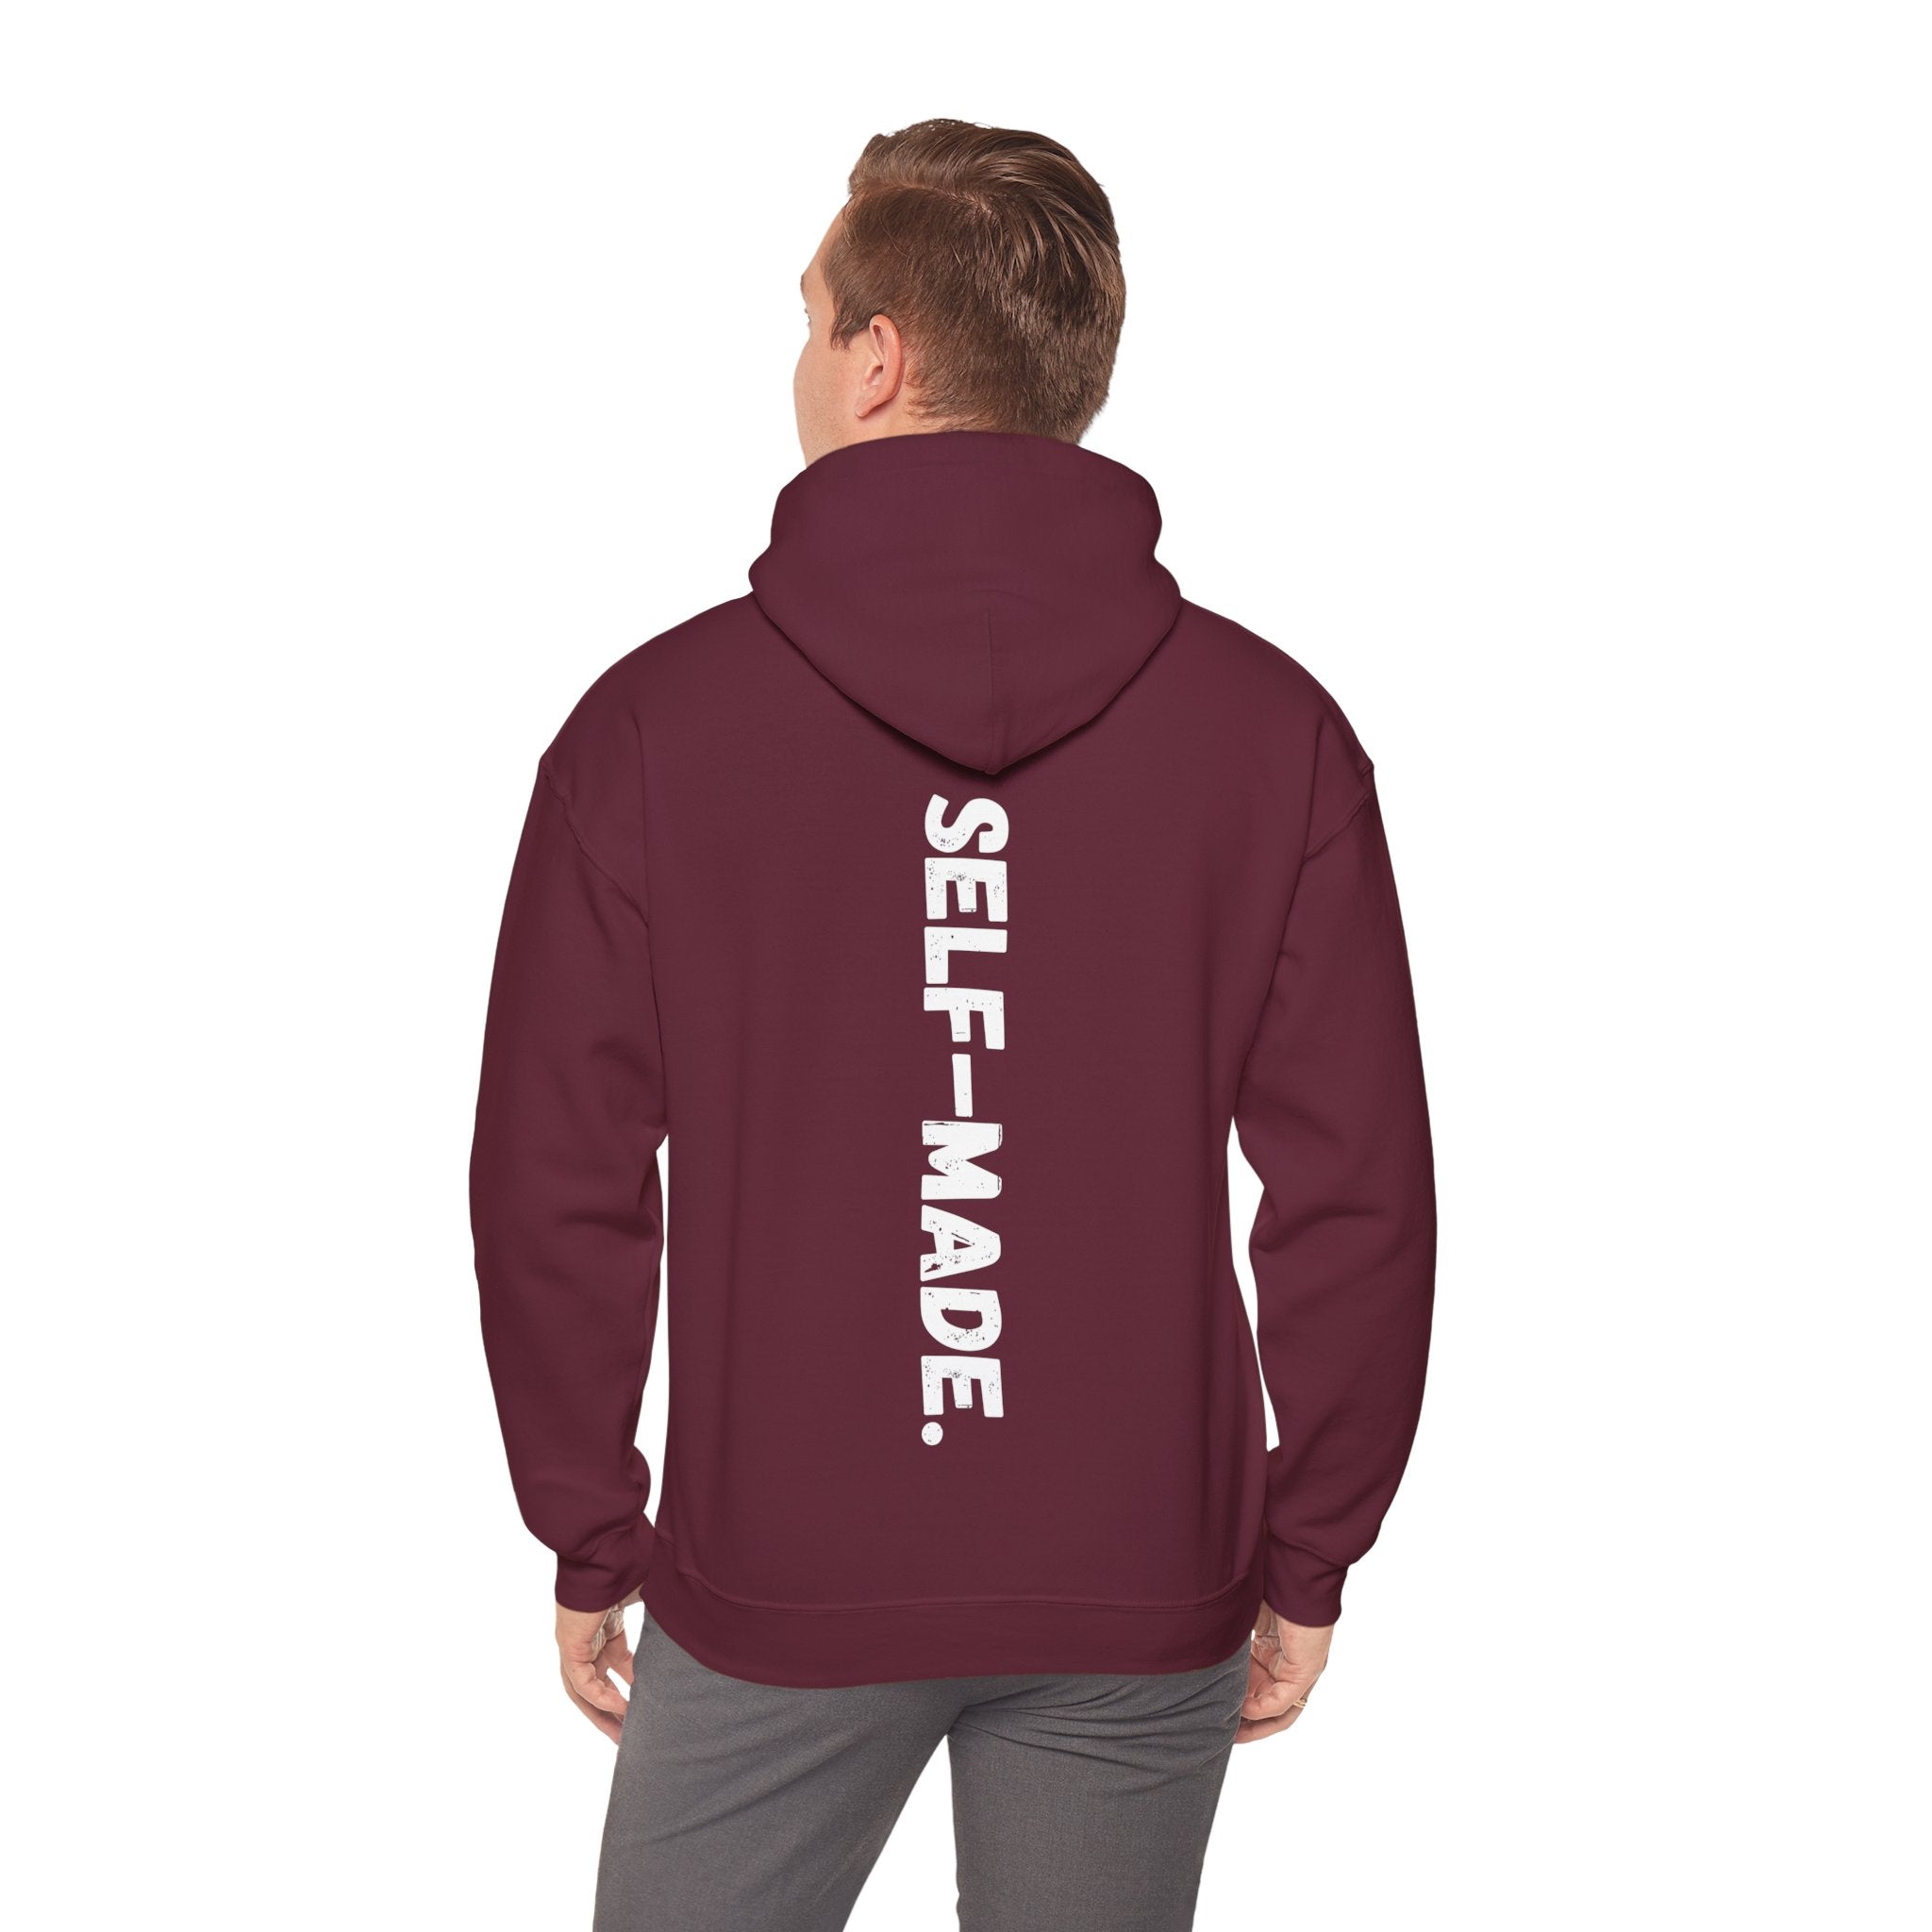 A person working hard to better his/herself - Self-Made. Hoodie - Breakthrough Collection